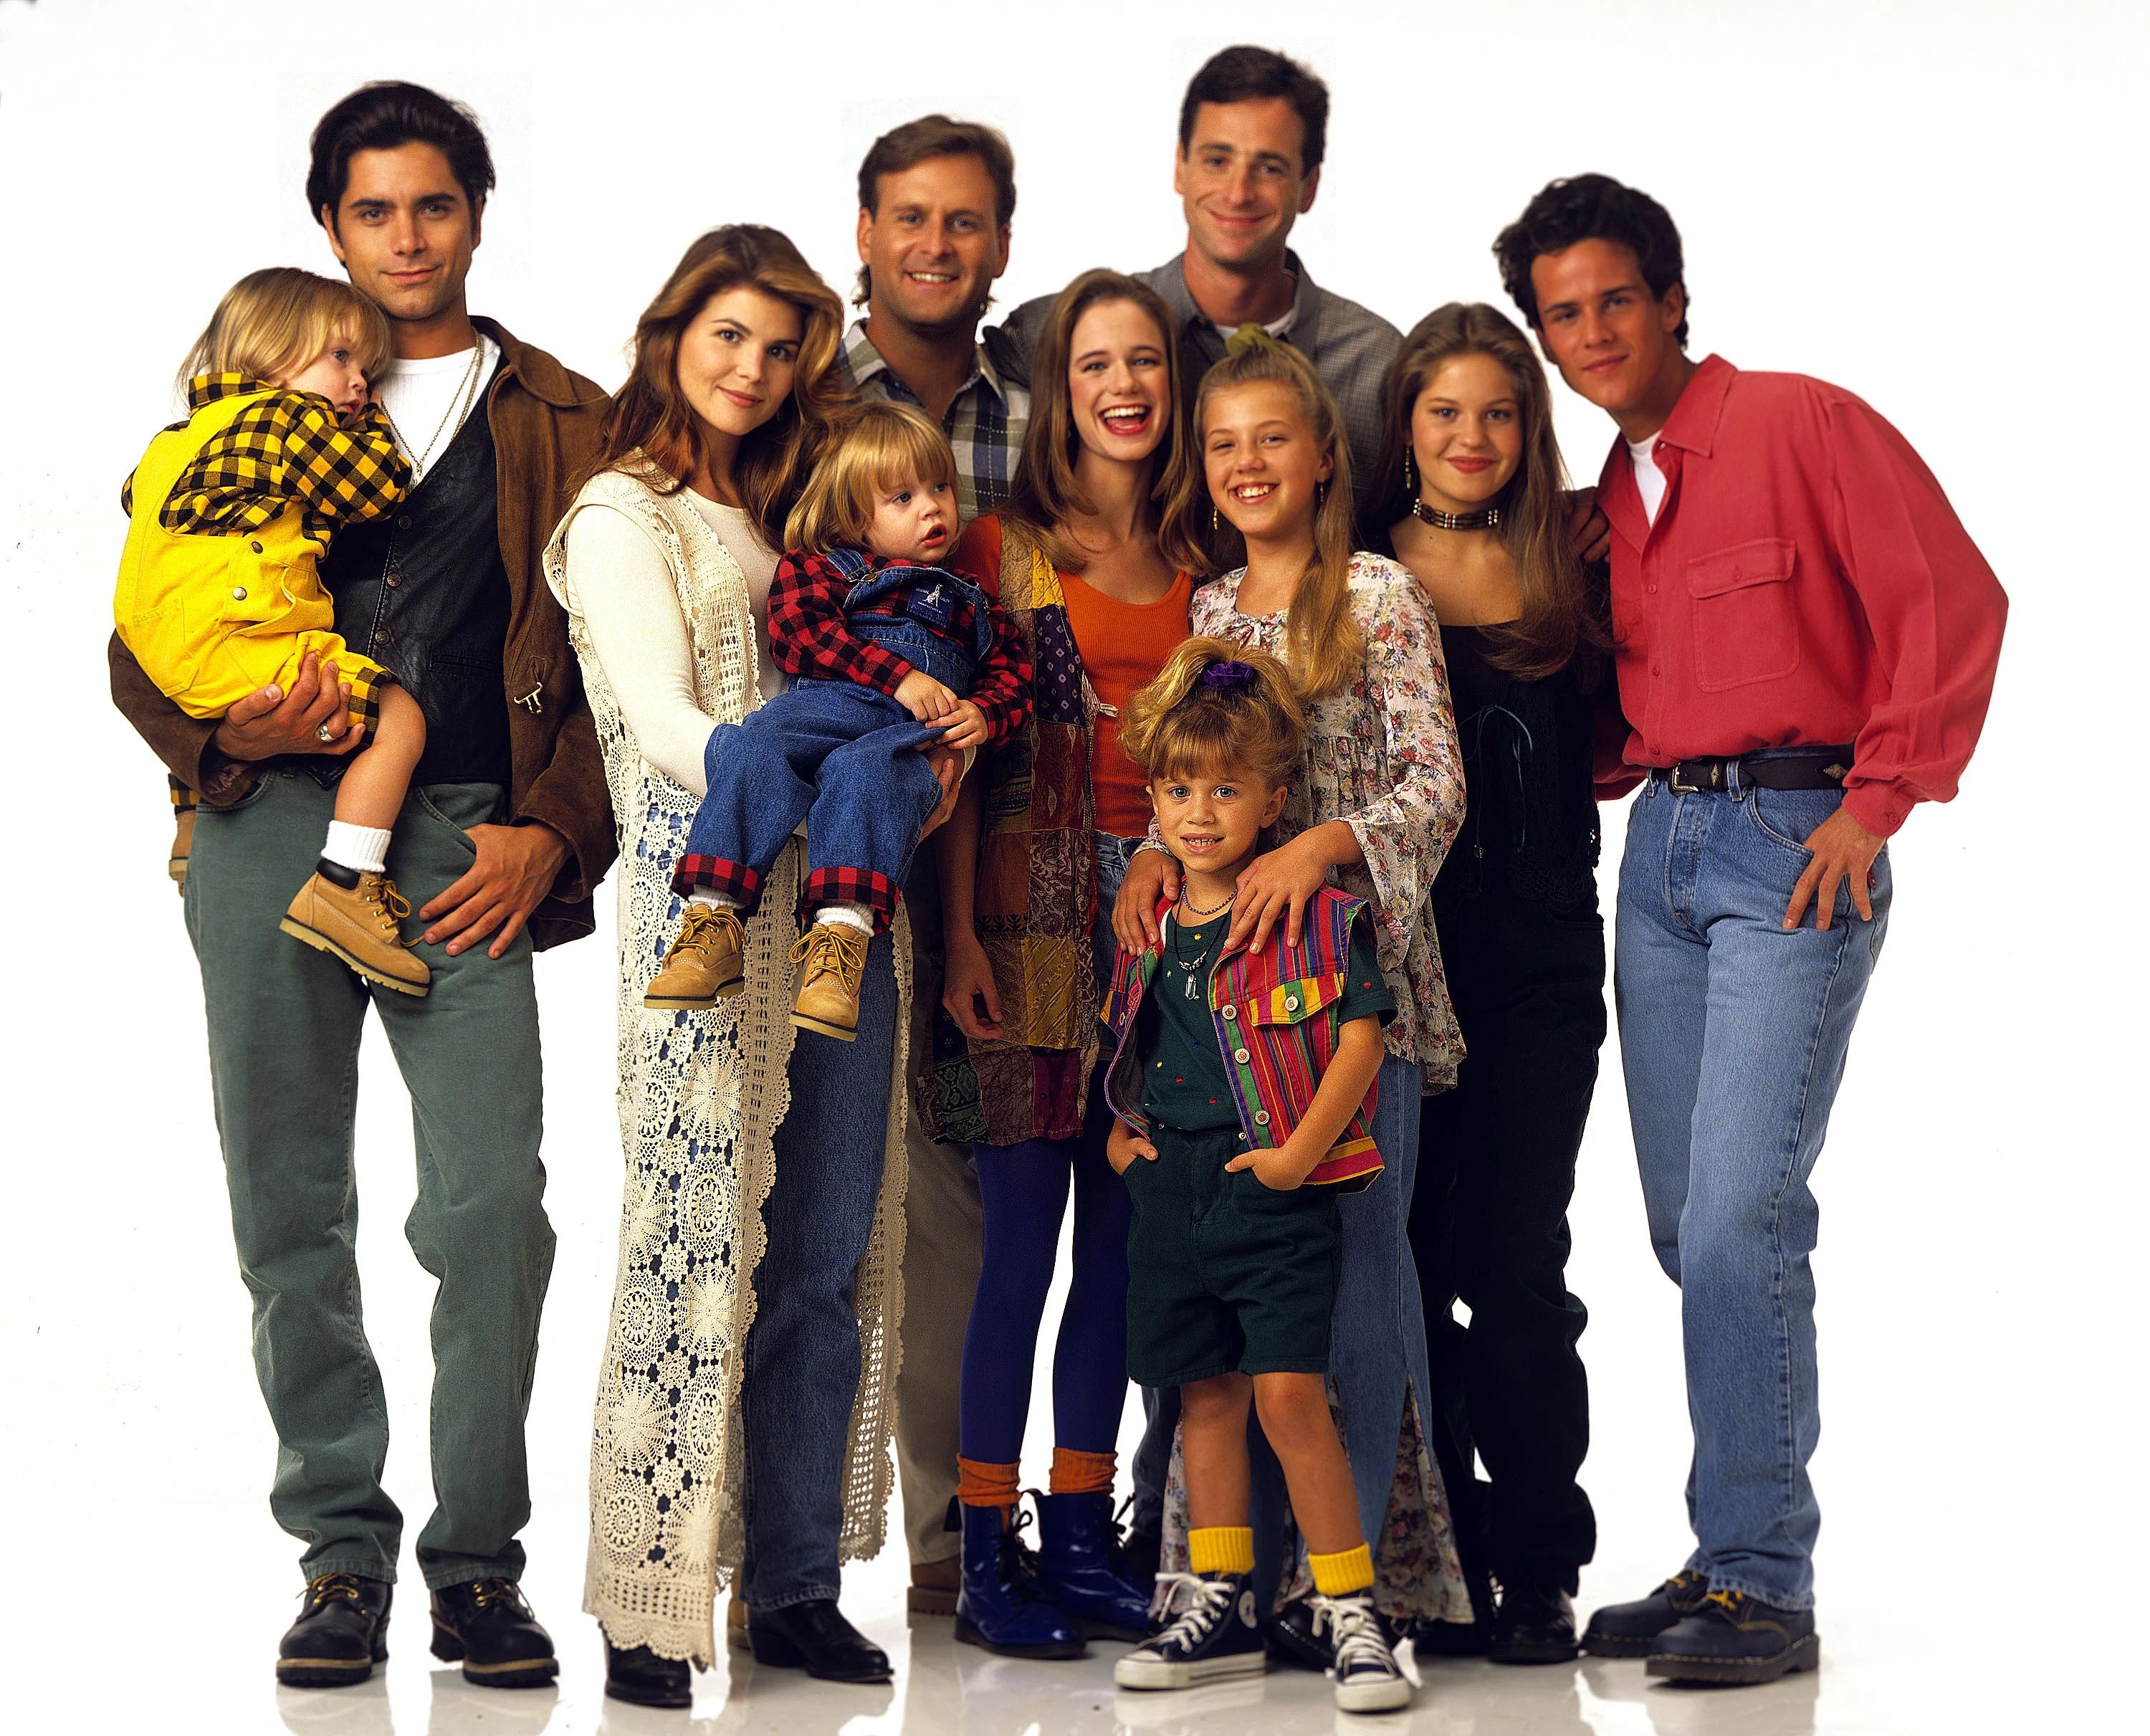 Season Seven promotional photo for the ABC tv series 'Full House', 09/14/1993. (Photo by Bob D'Amico /Disney General Entertainment Content via Getty Images)